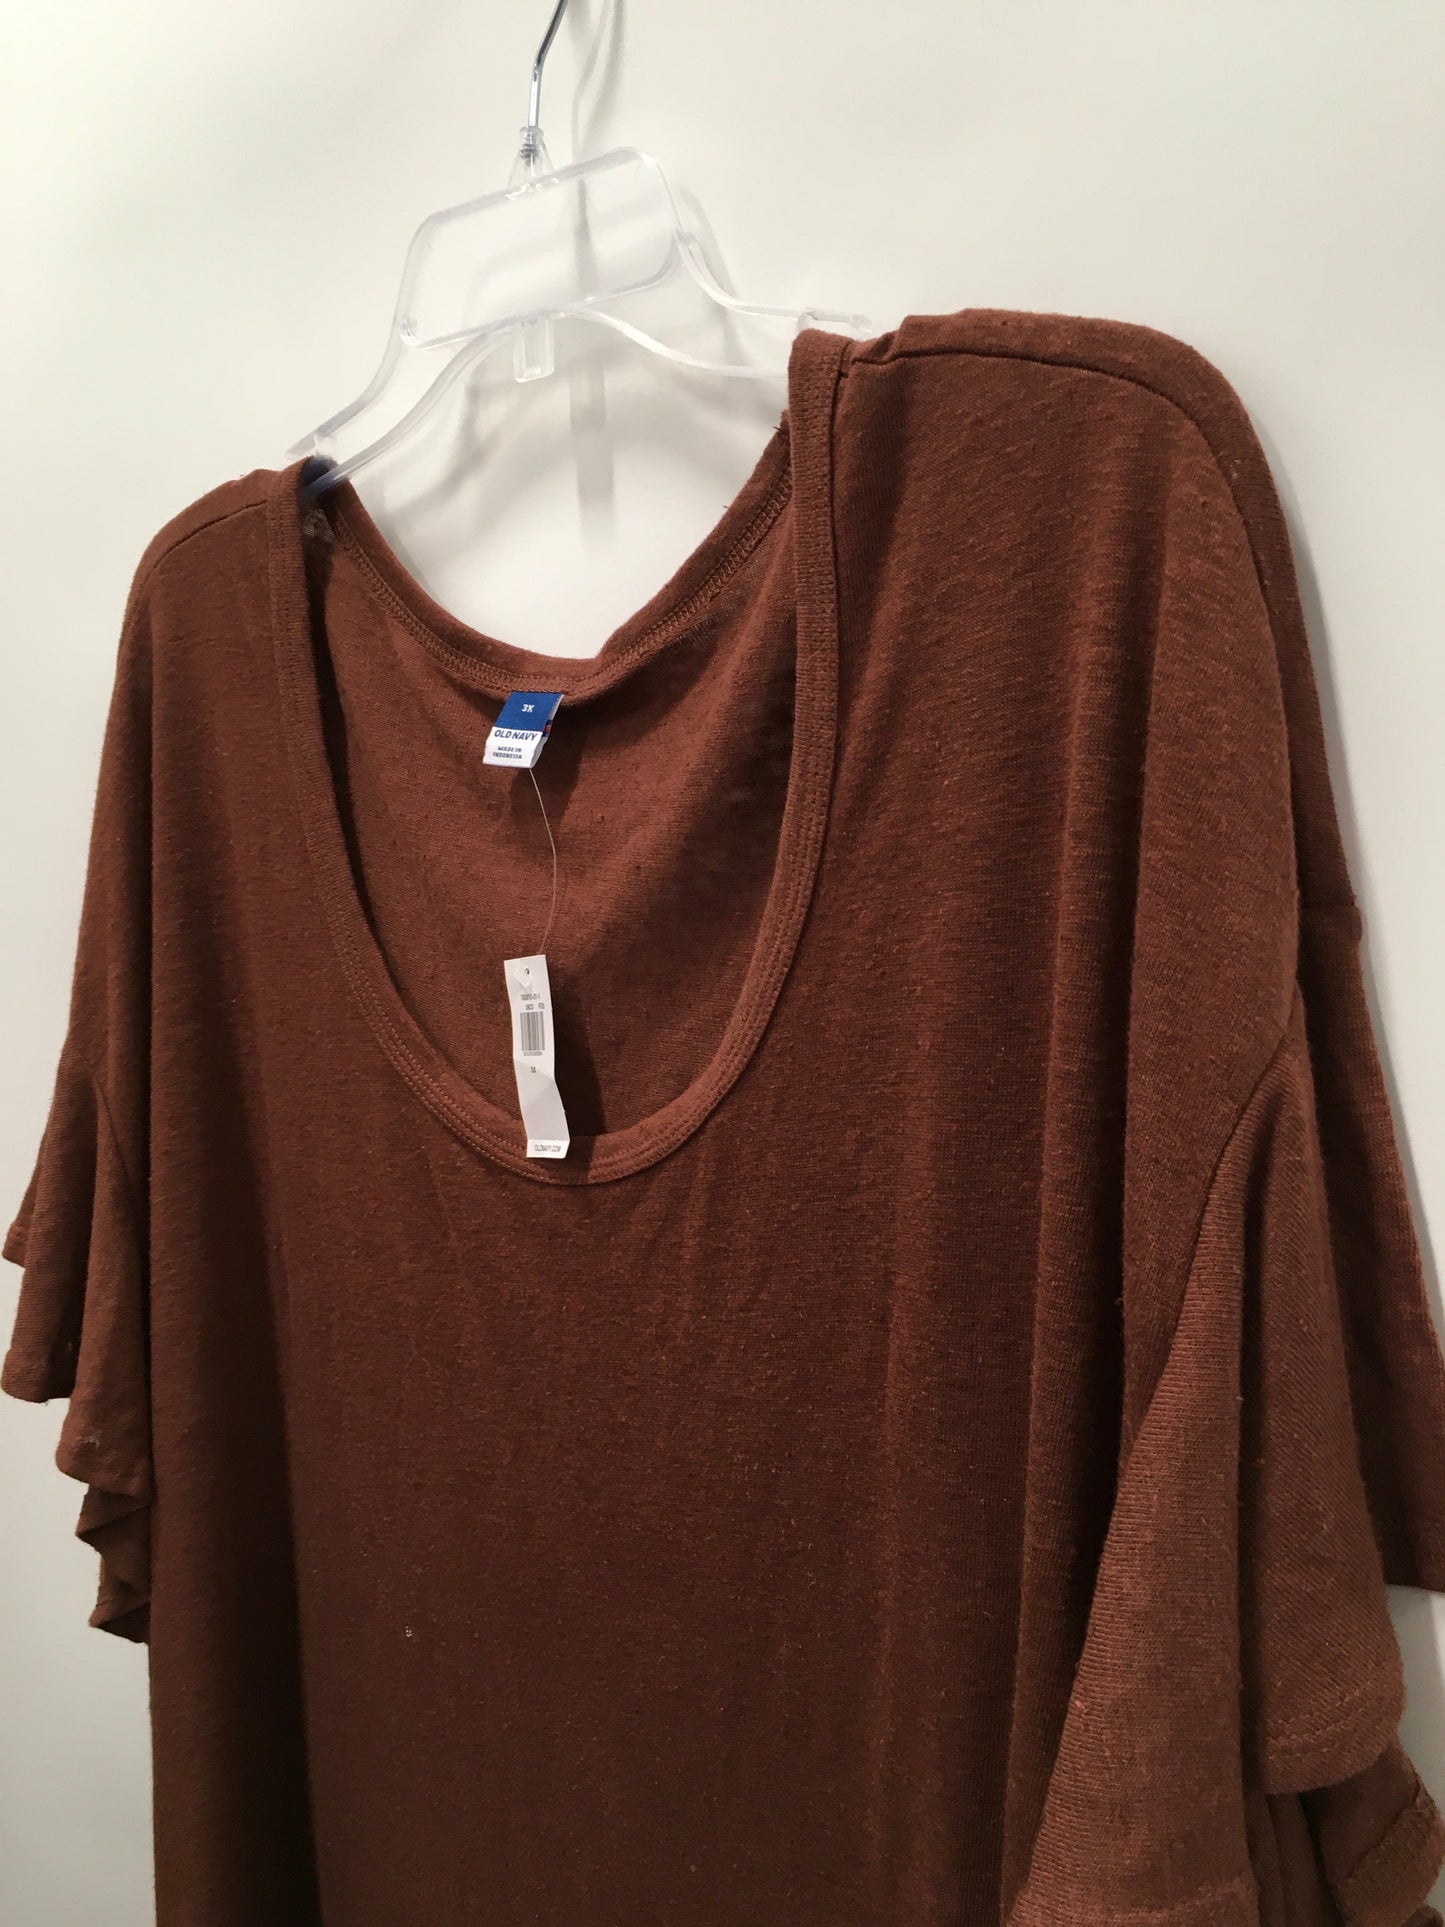 Brown Top Short Sleeve Basic Old Navy, Size 3x